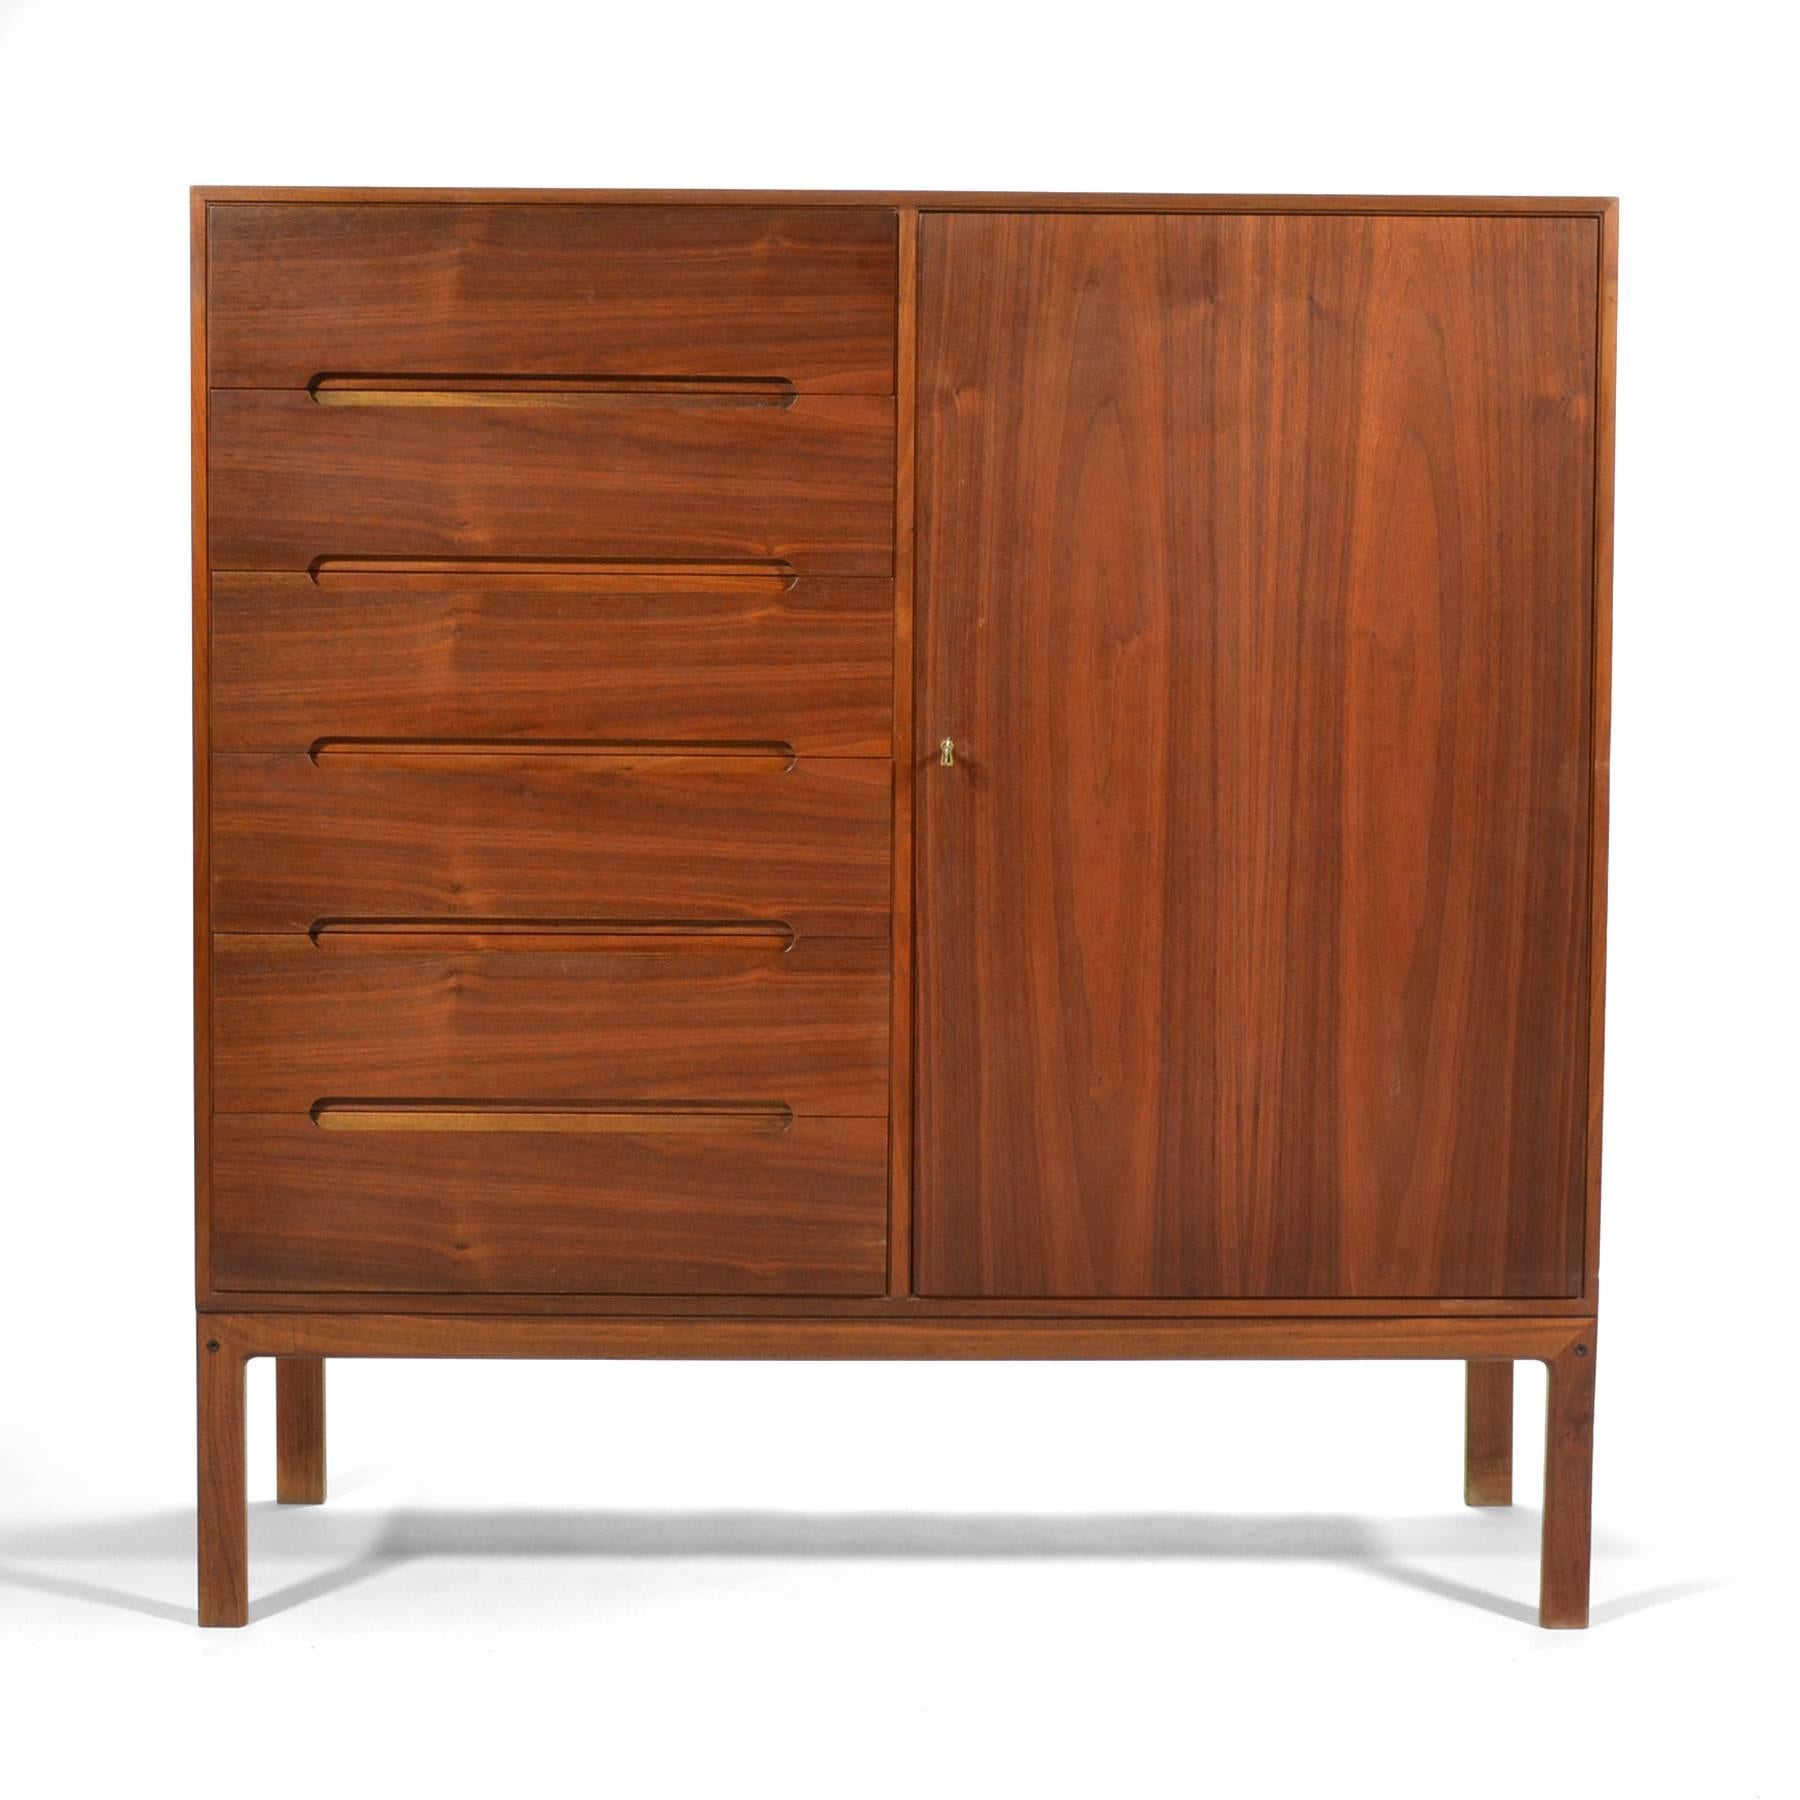 A spectacular design by Arne Wahl Iversen, this teak gentleman’s chest is as functional as it is beautiful. The left side features a bank of drawers with beautiful recessed pulls while the right side has a locking door that conceals a bank of